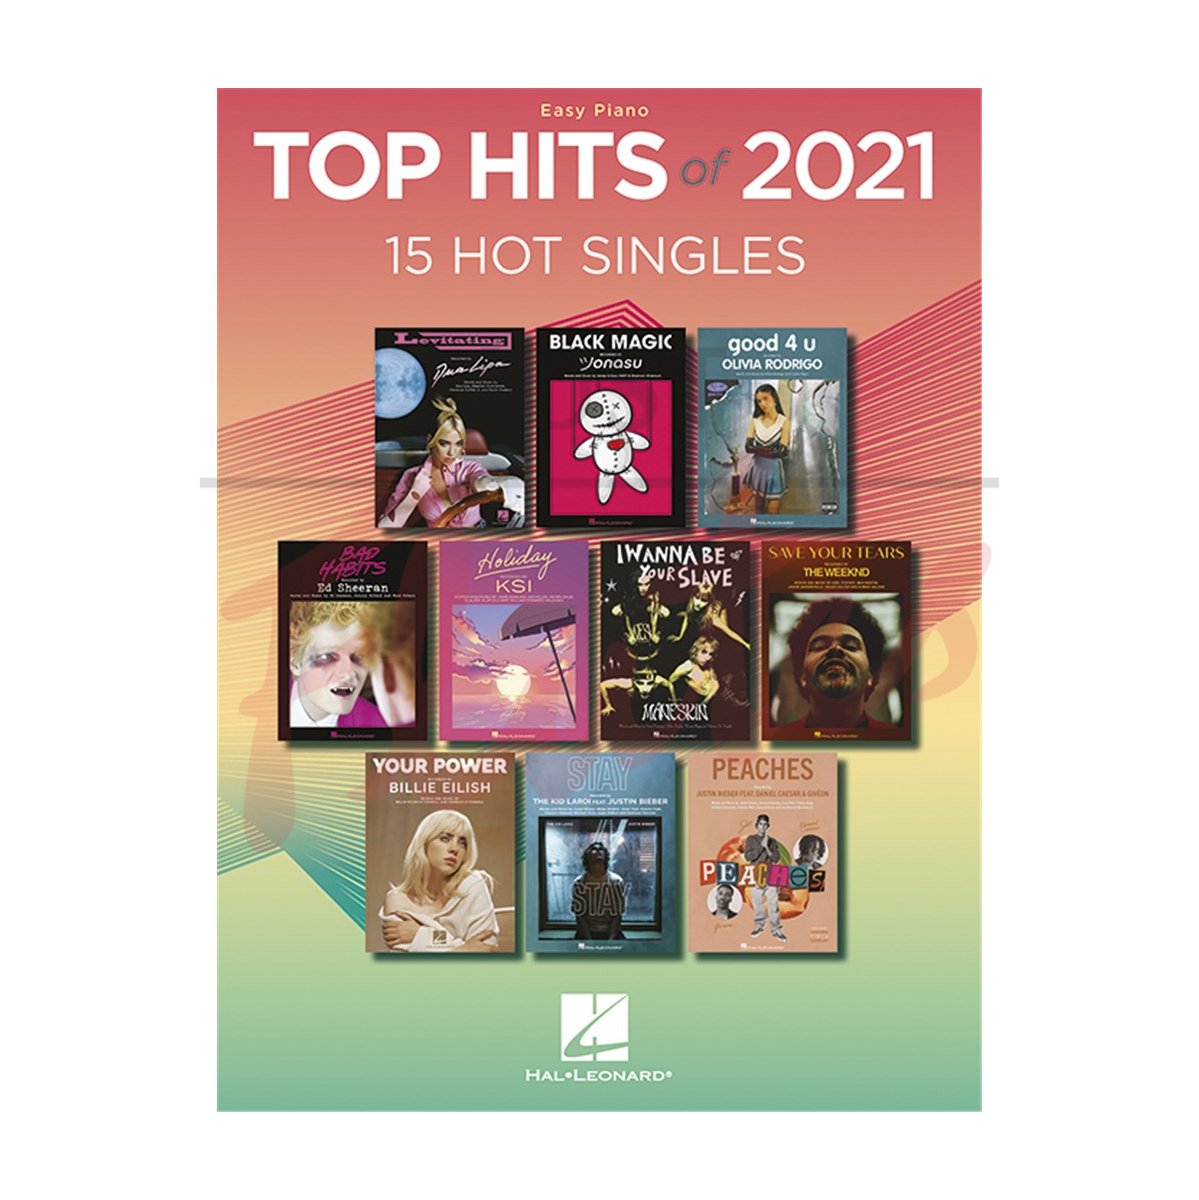 Top Hits of 2021 for Easy Piano